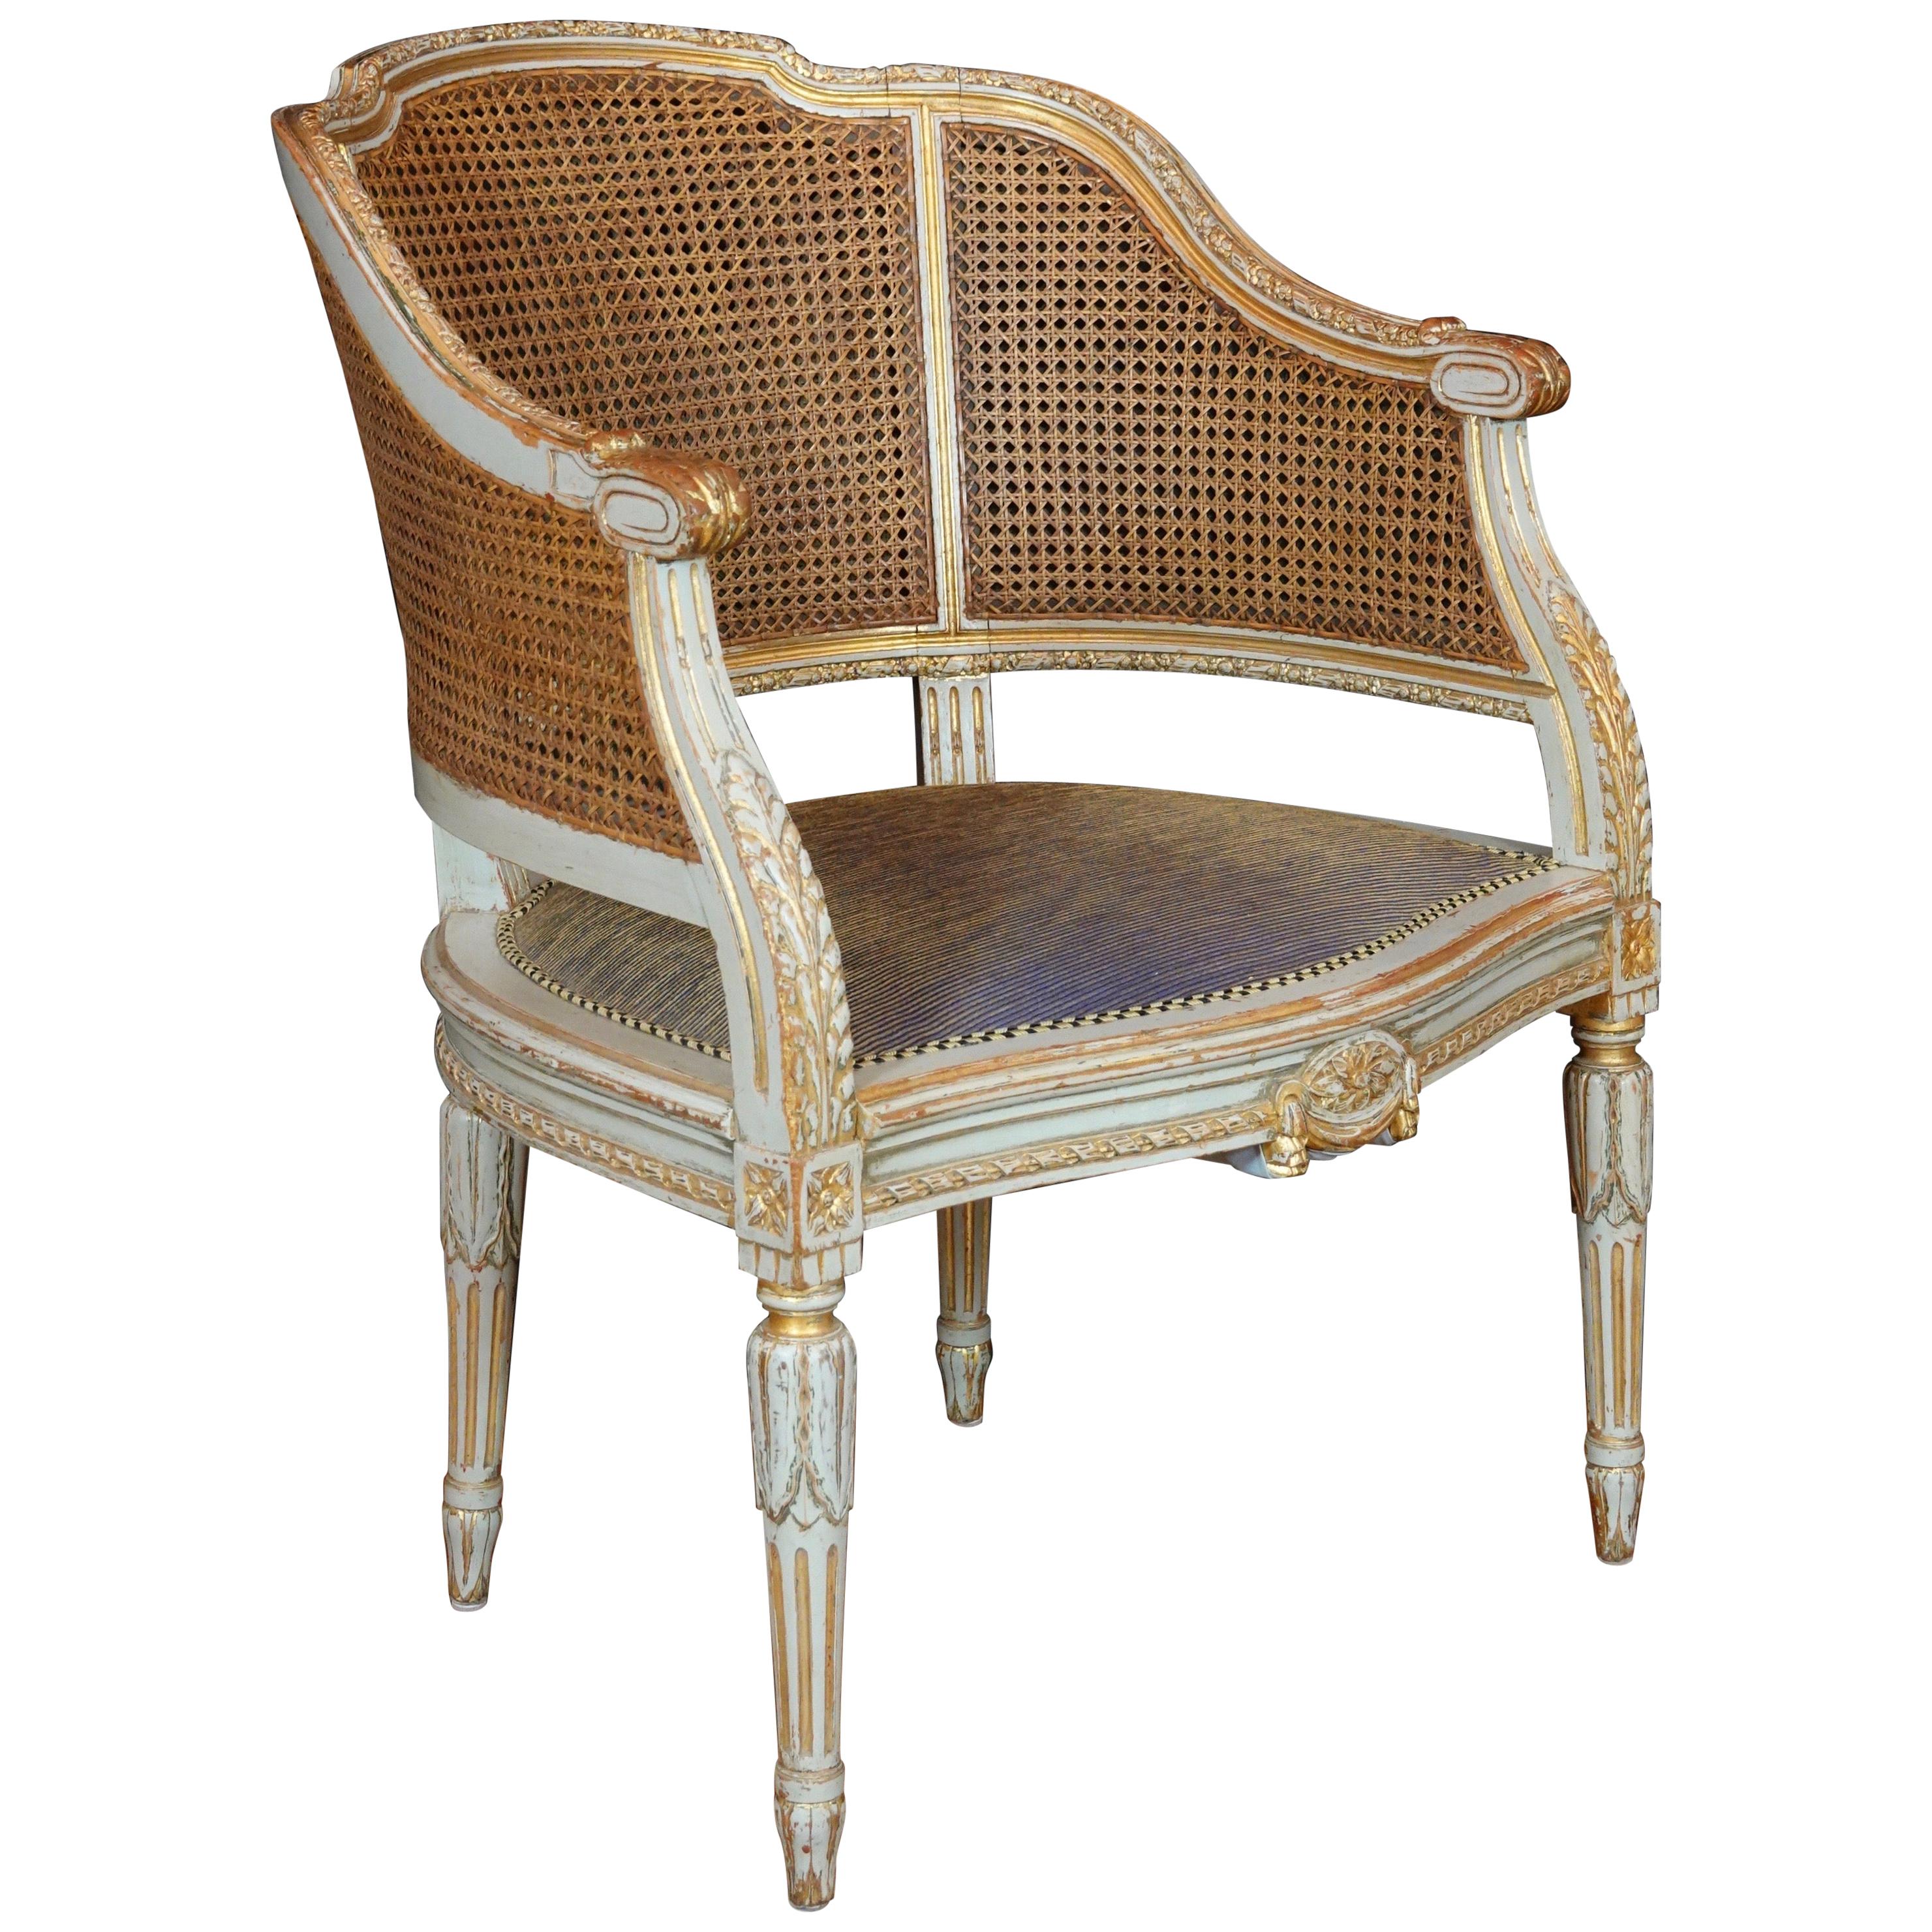 French Louis XVI Style Desk Chair with Caned Back and Upholstered Seat